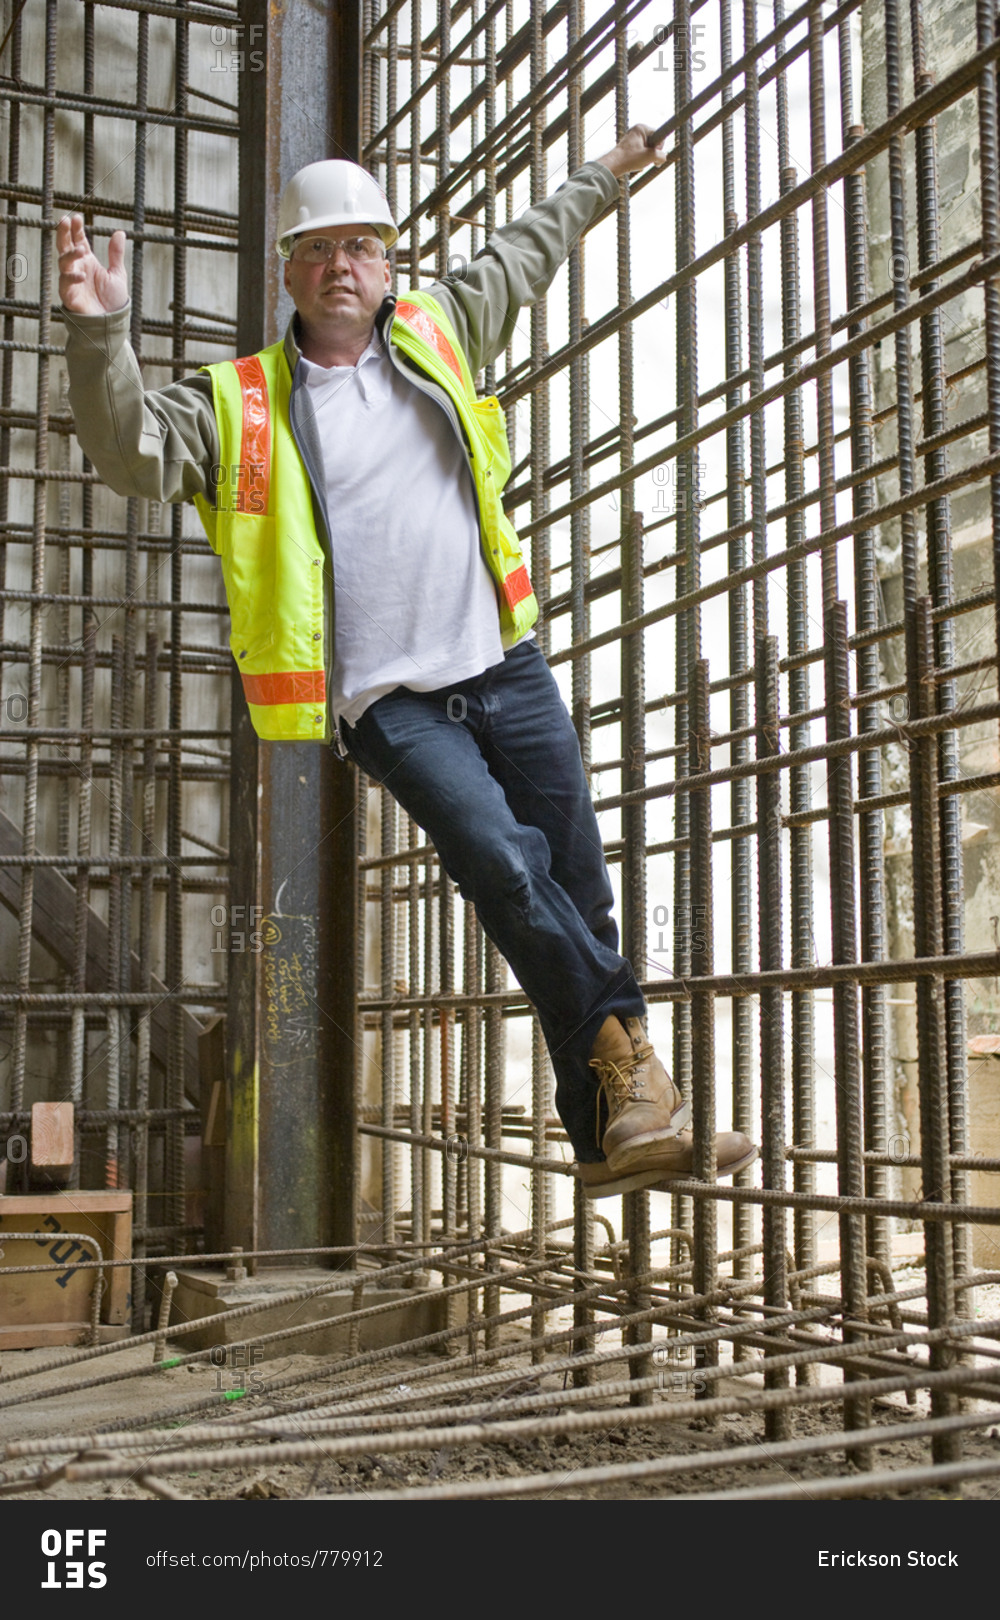 Portrait of a male construction worker hanging from a wire grid on a construction site.